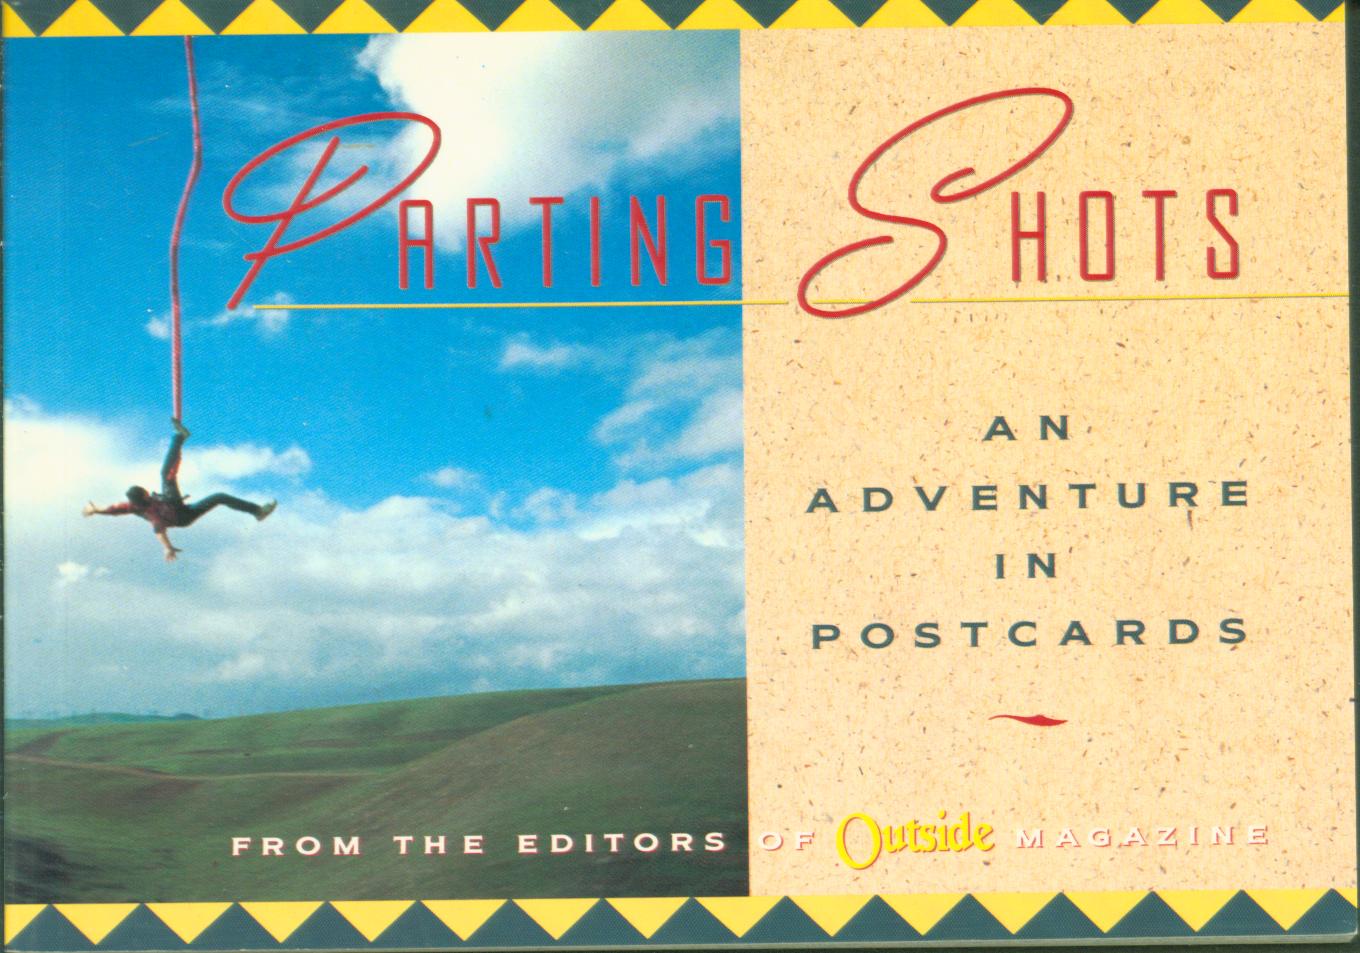 PARTING SHOTS: an adventure in post cards.